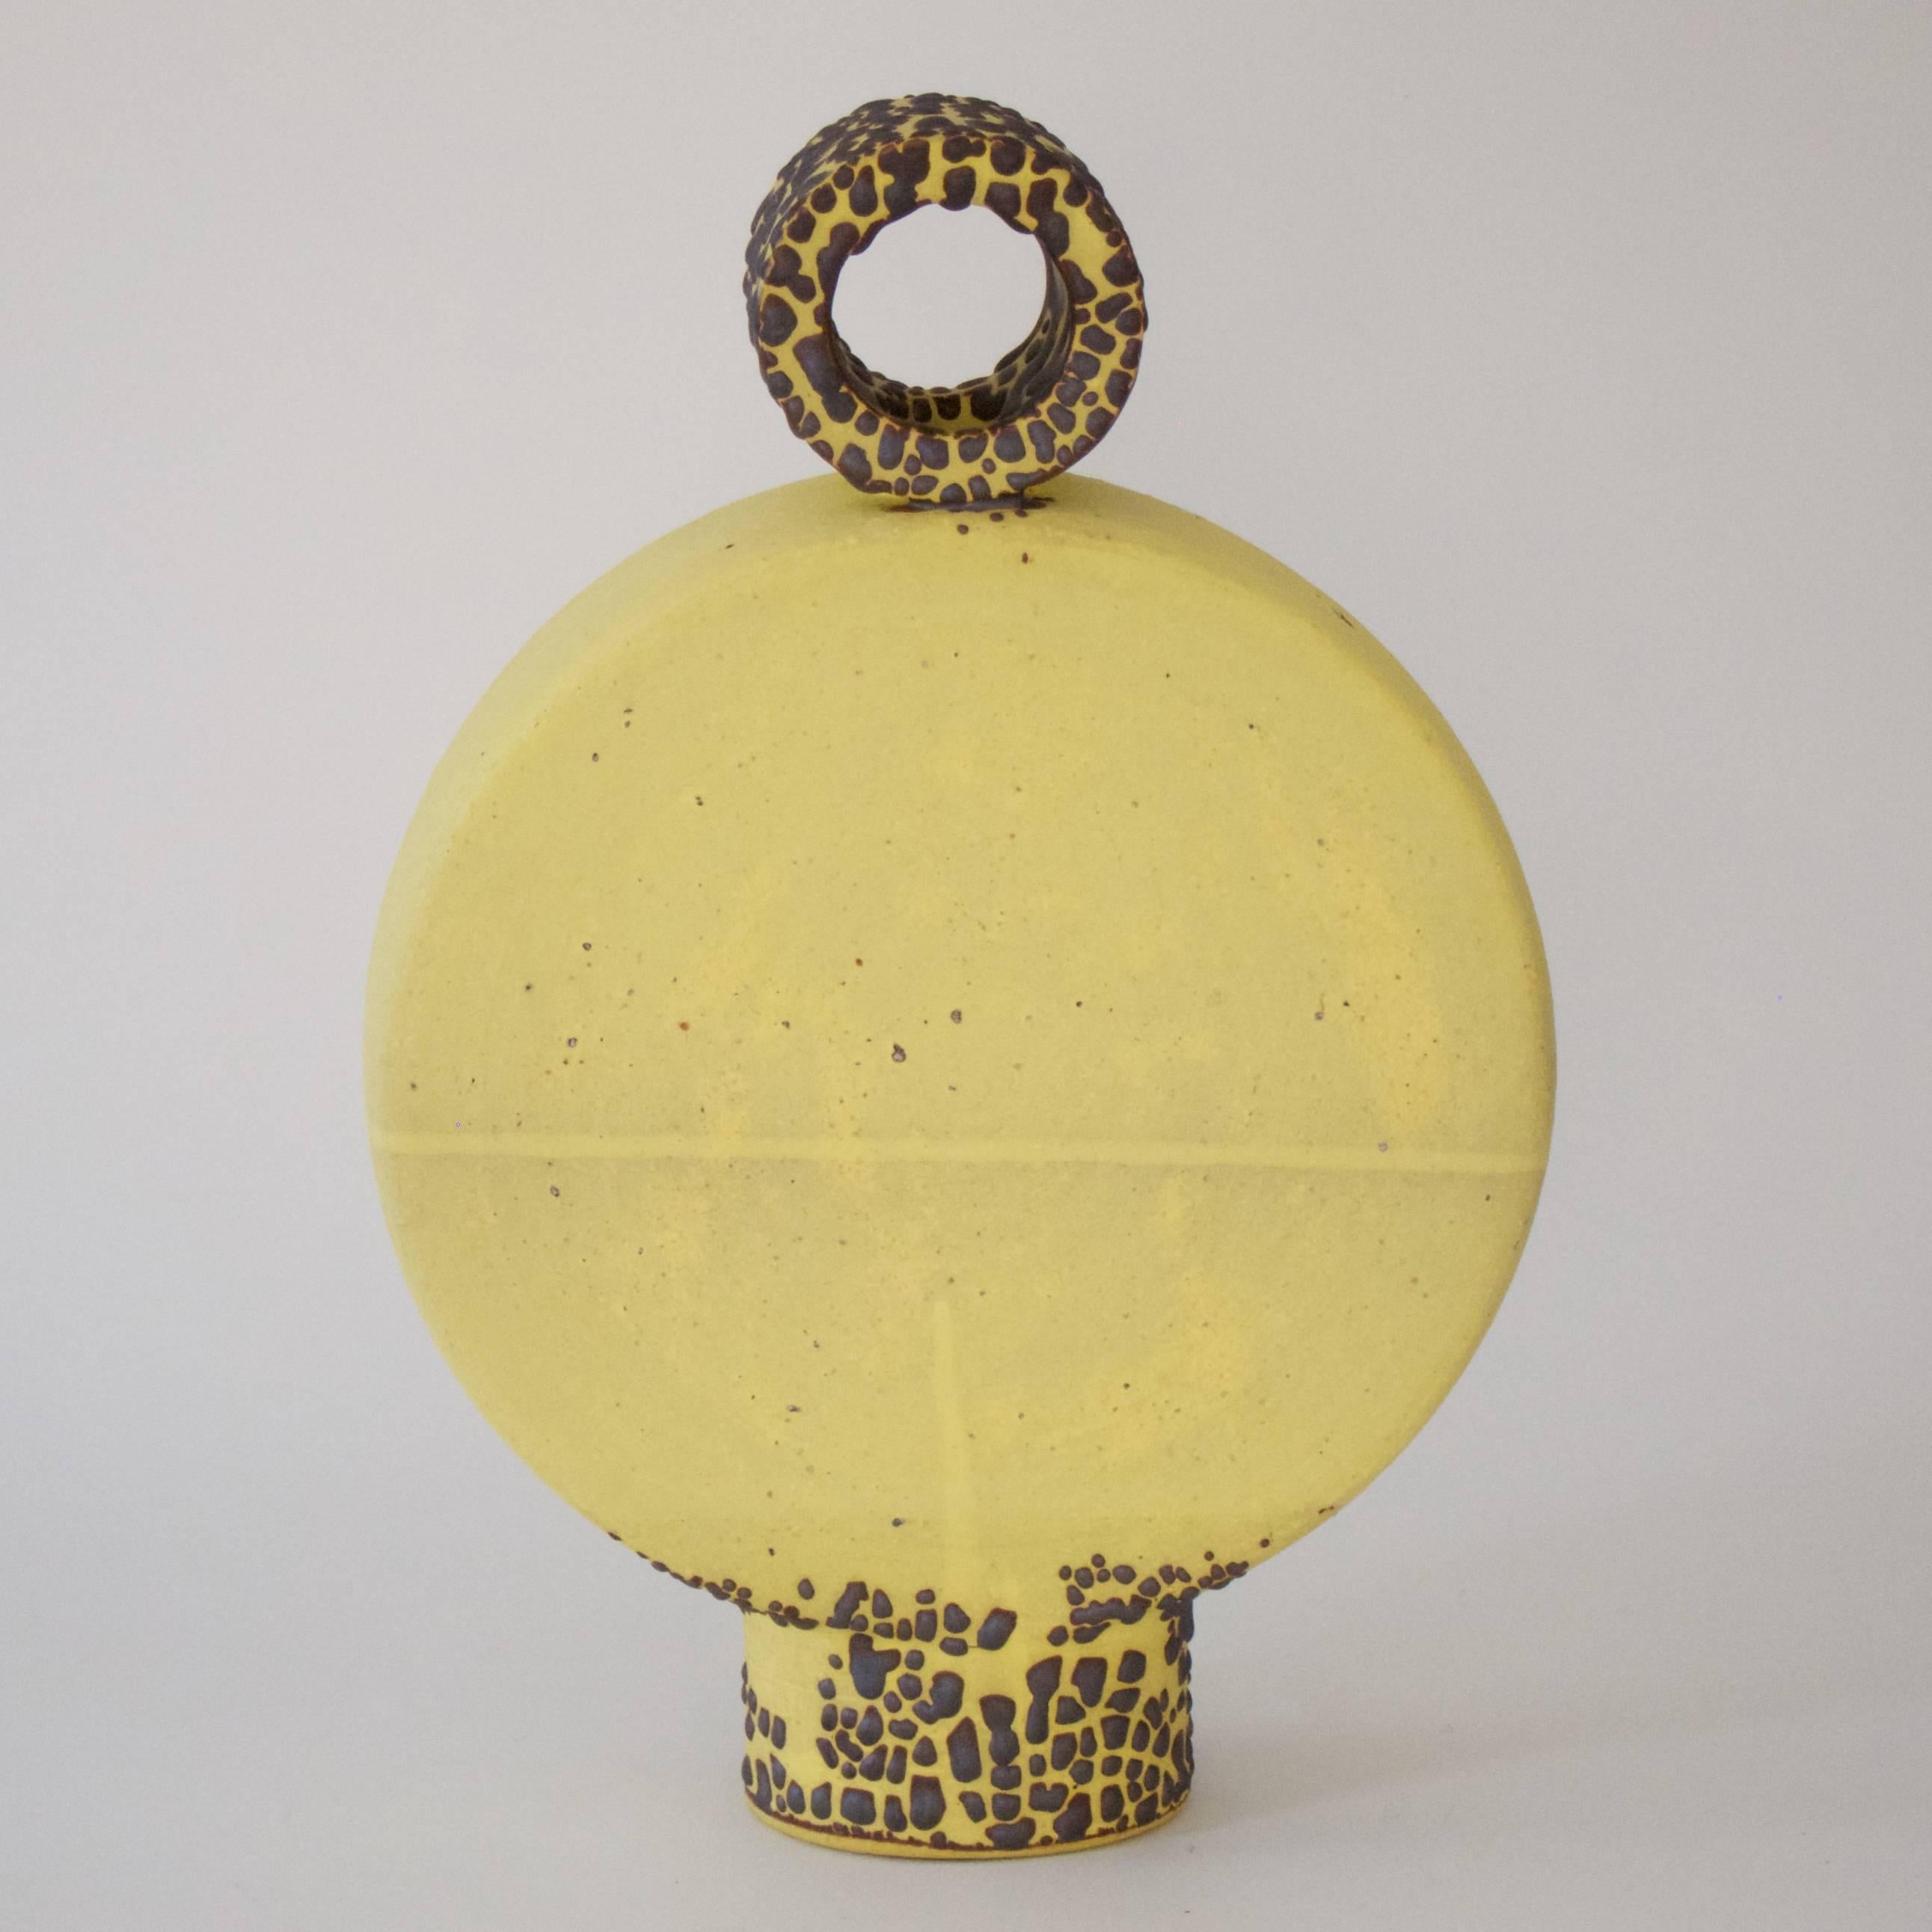 A stoneware ceramic vase by Matthias Kaiser.
The body of the vase is a flat disc, made from two large trays that have been joined at the rims.
It is supported by an oval foot ring. The shape corresponds to that of traditional pilgrim flasks,
but is